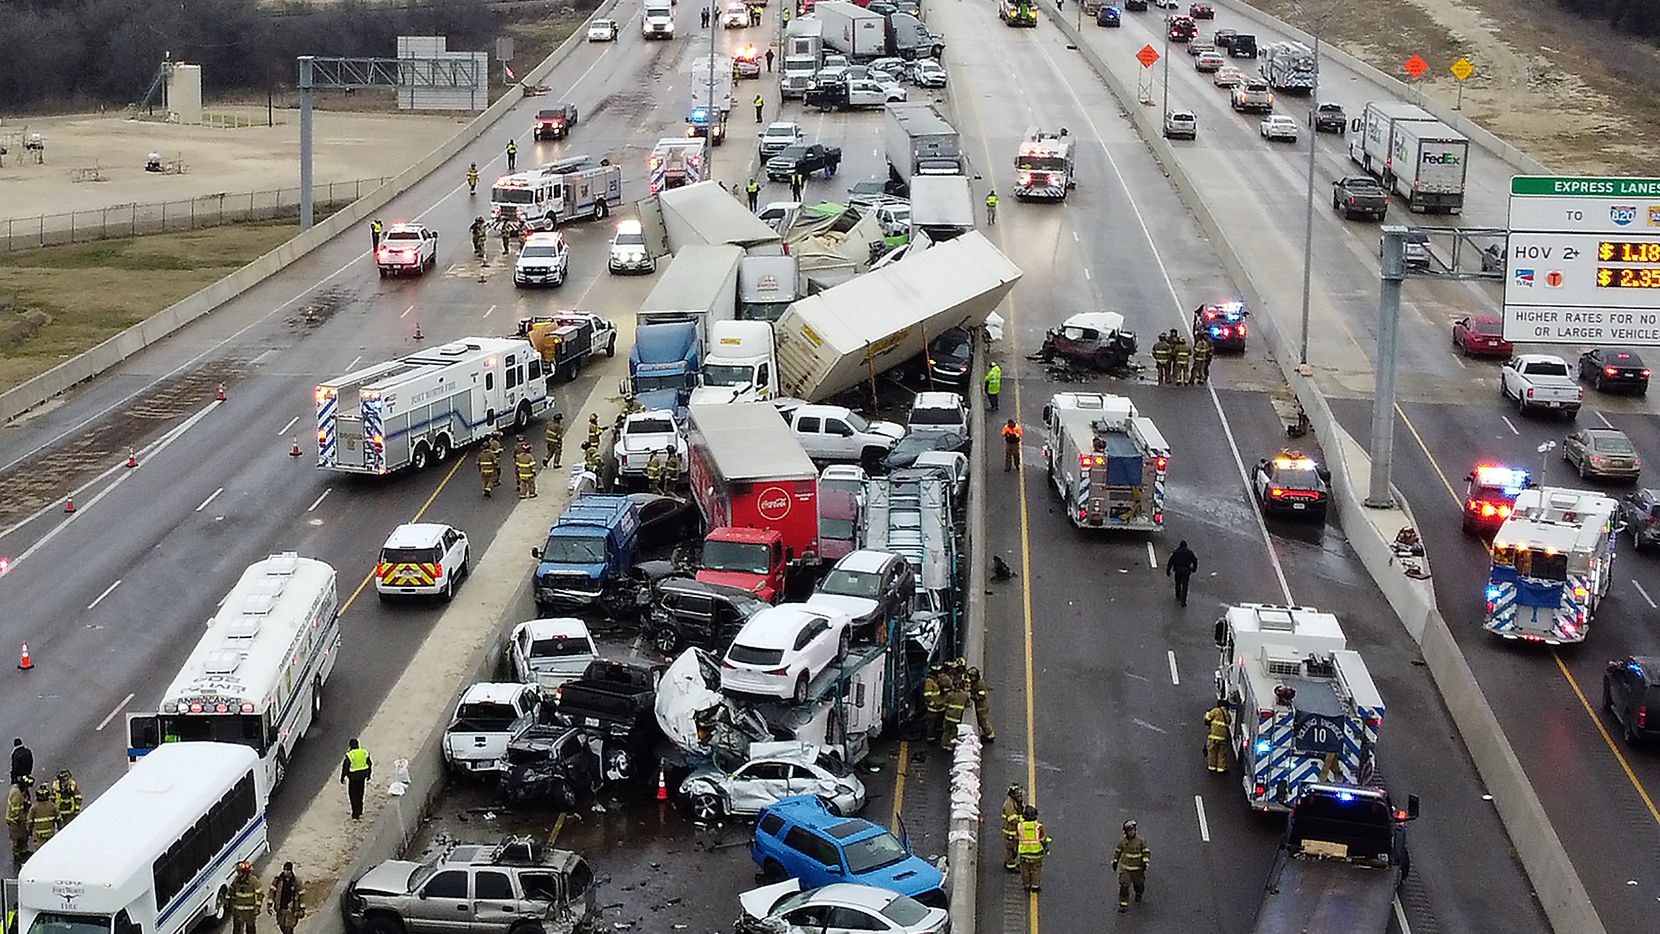 135 Vehicles Involved In Fort Worth Pileup, 6 Dead